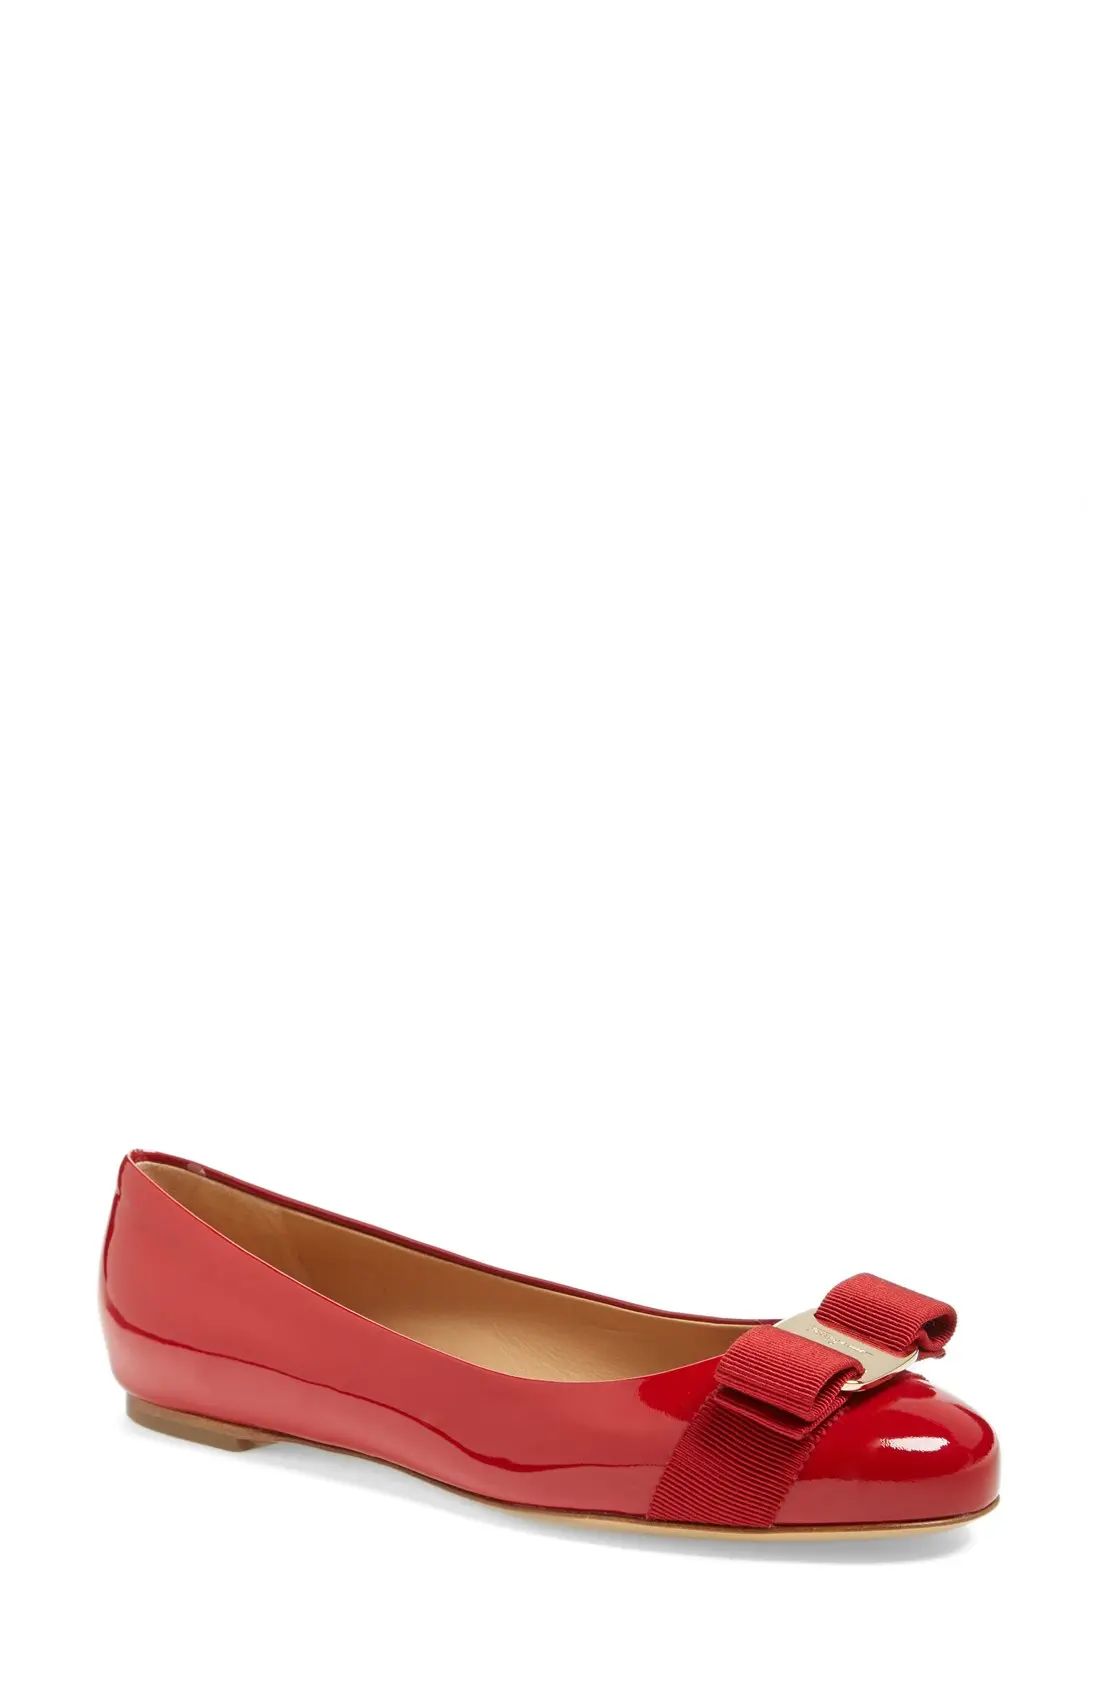 Salvatore Ferragamo Varina Leather Flat in Red at Nordstrom, Size 6.5 | Nordstrom